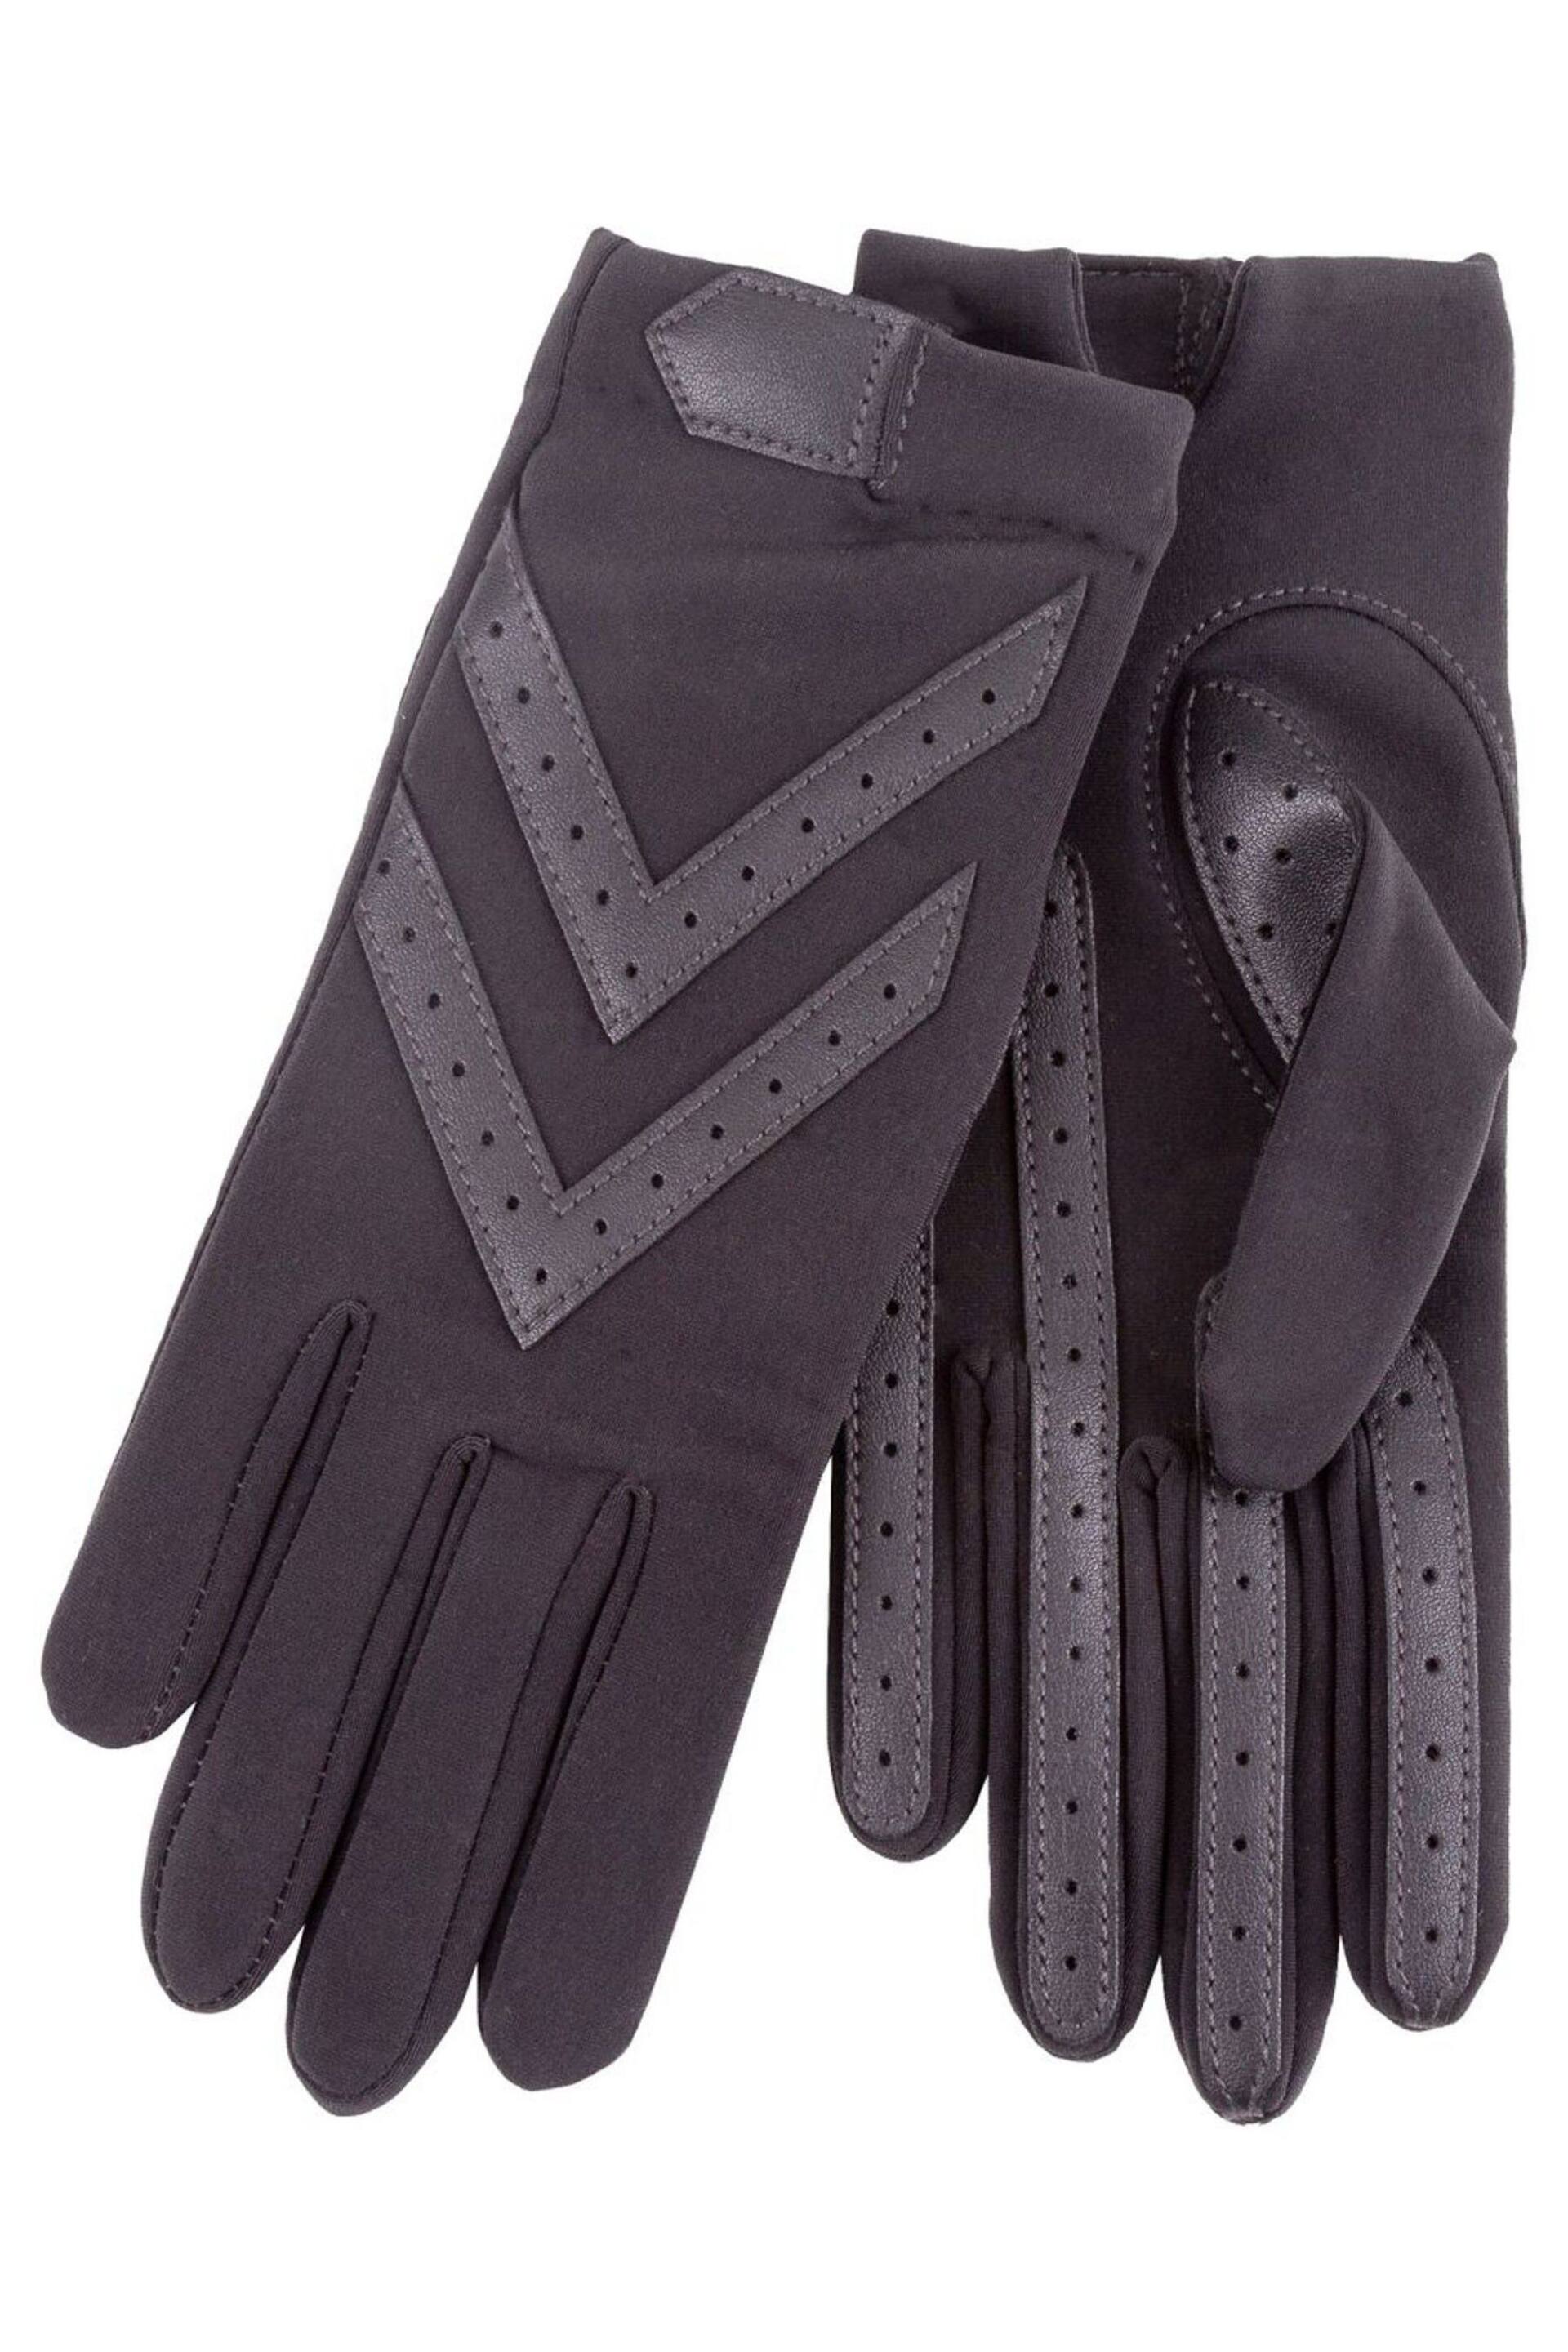 Totes Grey Original Stretch Gloves With Brushed Lining & Smartouch - Image 1 of 1